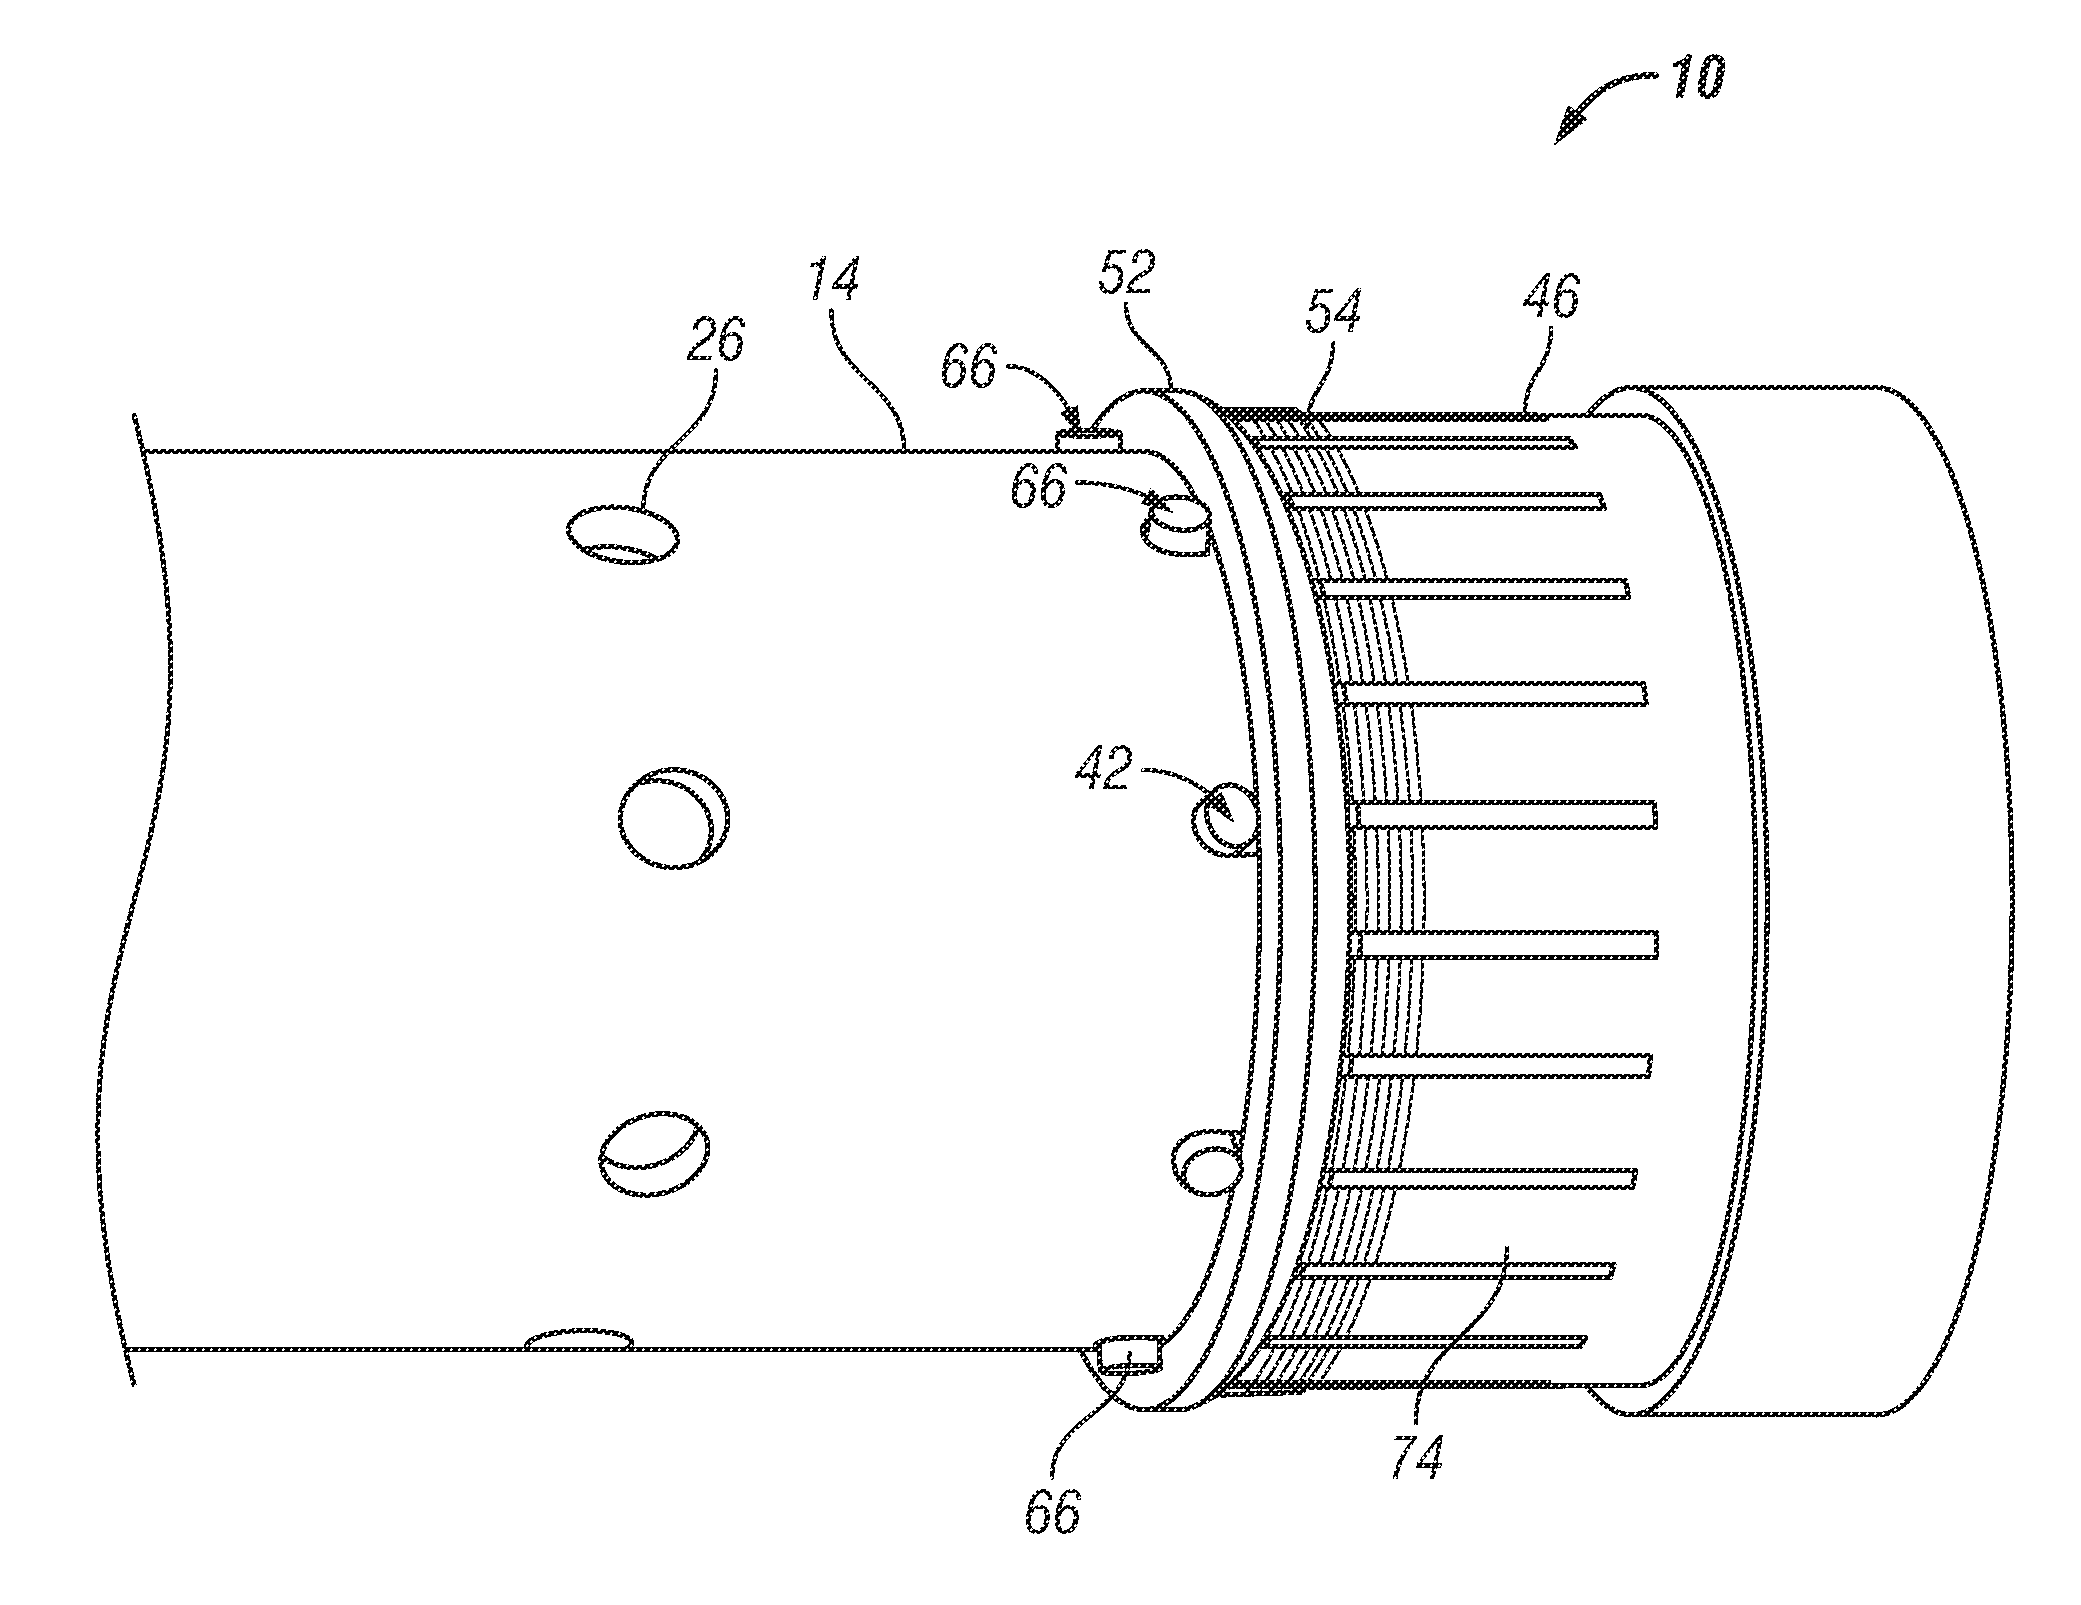 System and method for fracturing a formation and a method of increasing depth of fracturing a formation